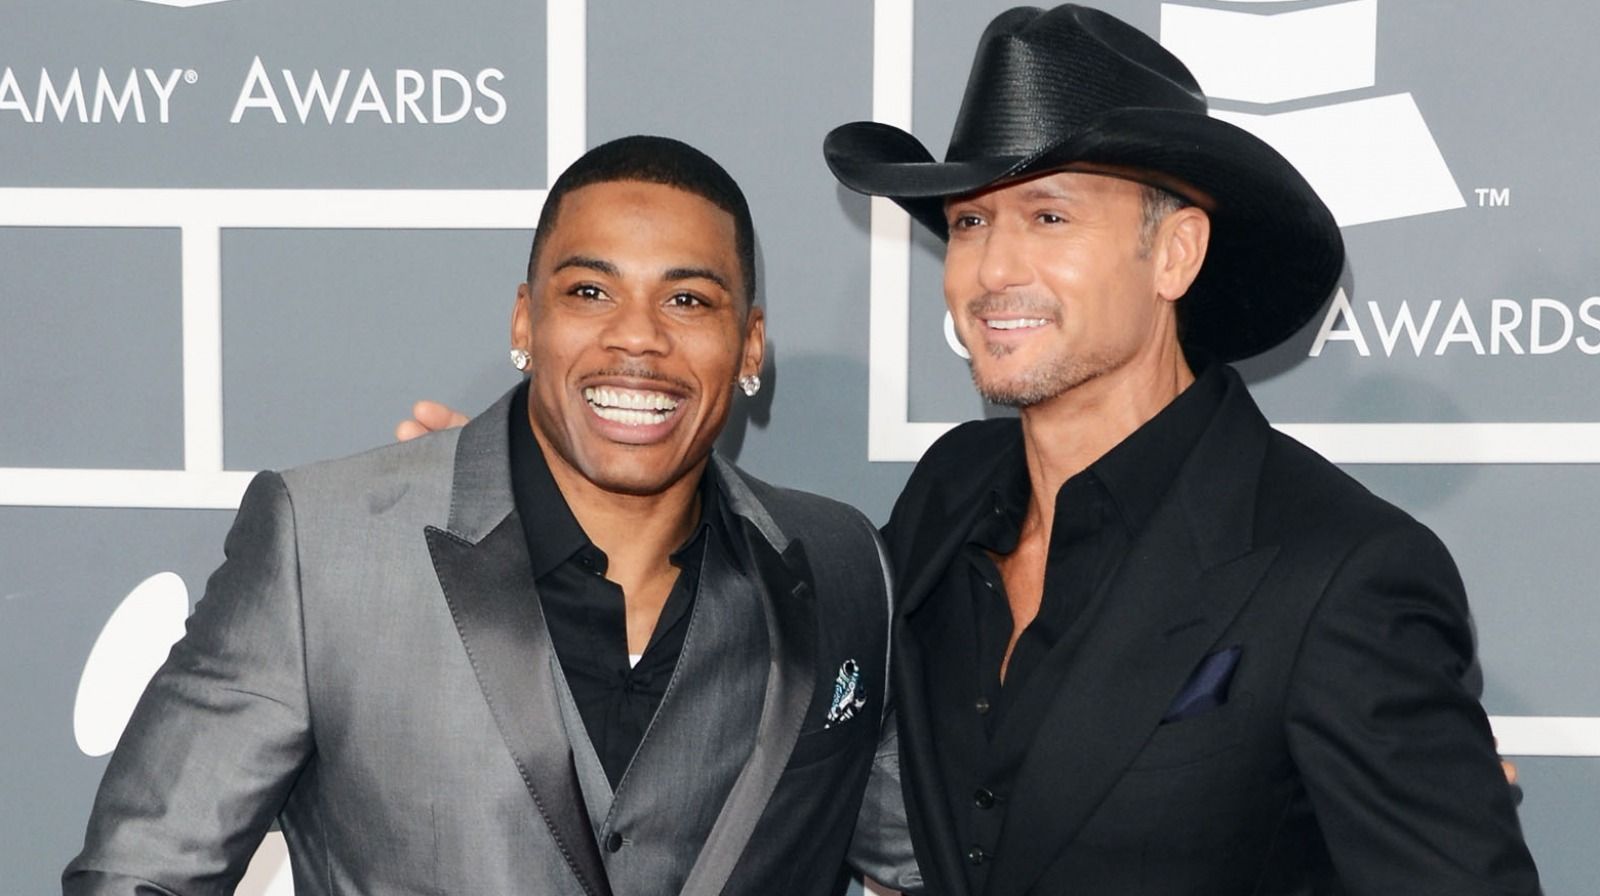 Nelly and Tim McGraw at the Grammys